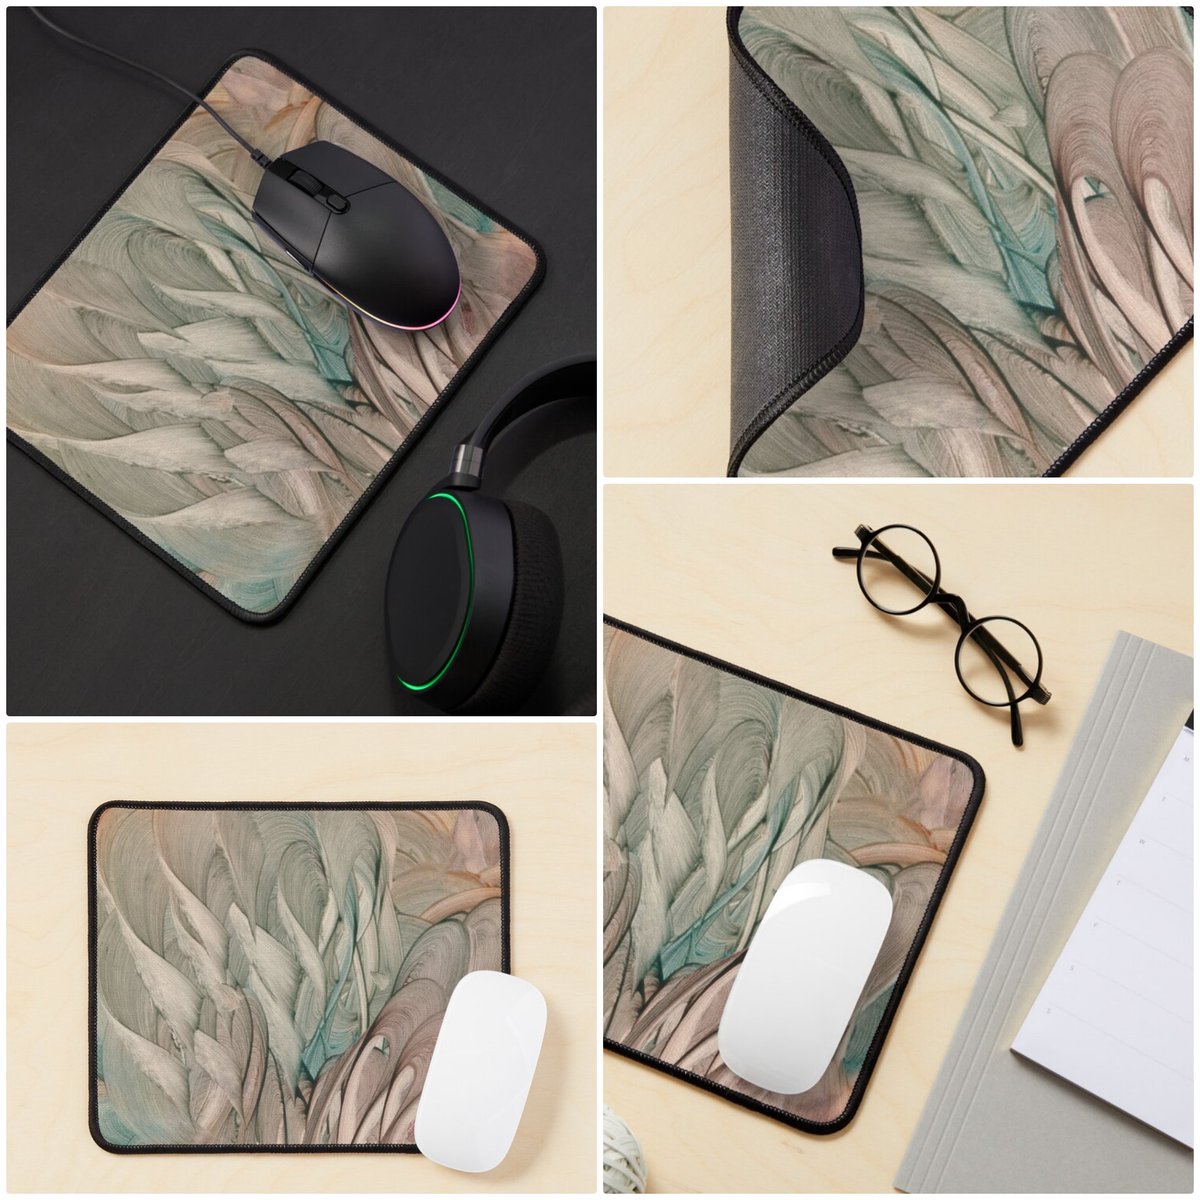 Ereshkigal Mouse Pad~Be Artful~ #accessories #office #art #artfalaxy #desk #galaxy #iPad #iphones #laptop #magnets #mouse #notebooks #phones #skins #pins #redbubble #stickers #wallets #trendy #modern #FindYourThing #pink #orange #green #teal #white redbubble.com/i/mouse-pad/Er…